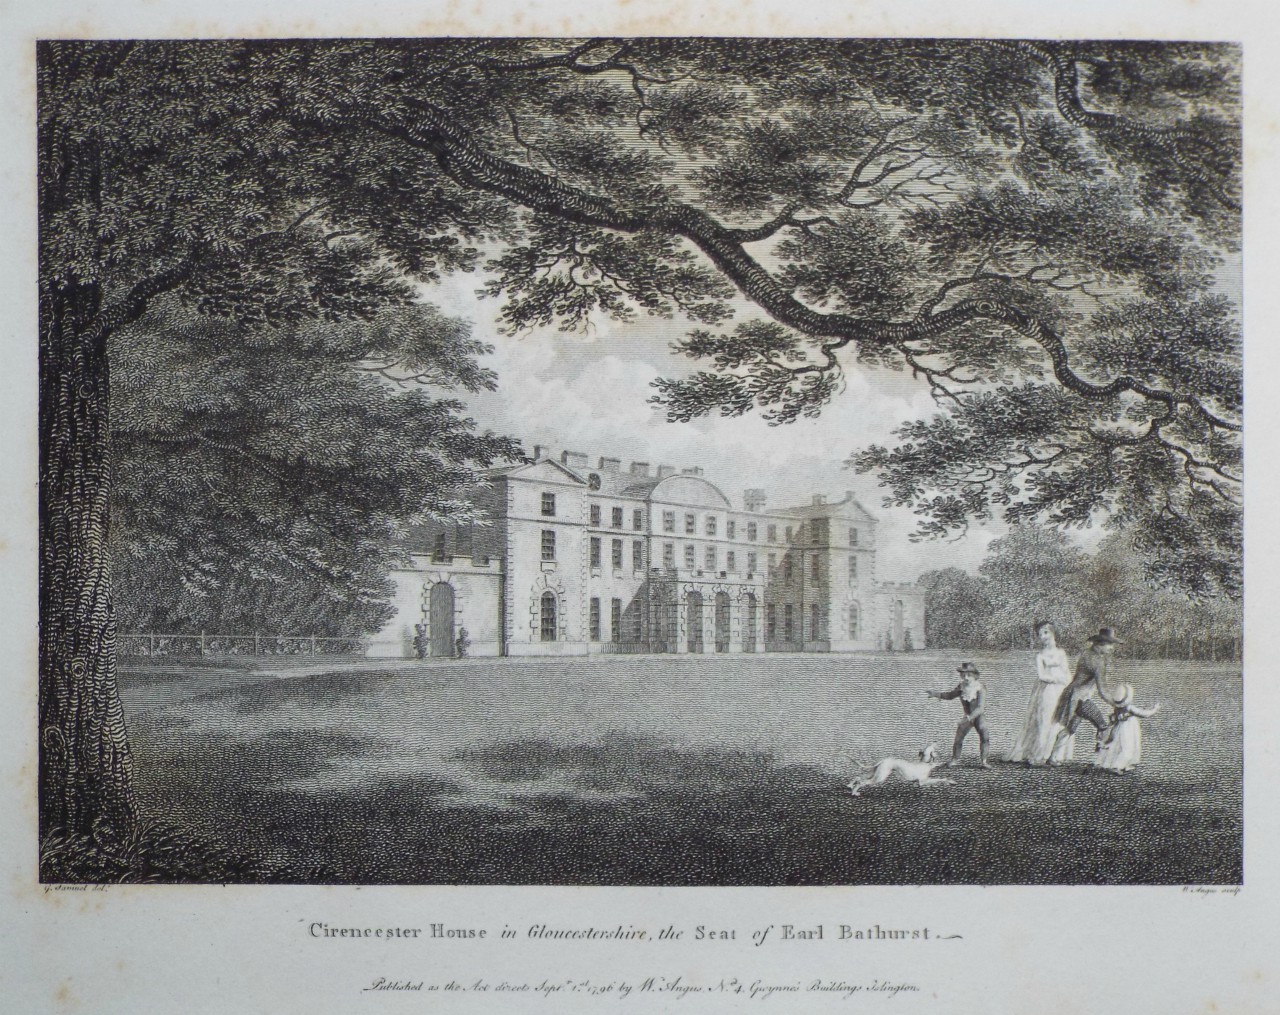 Print - Cirencester House in Gloucestershire, the Seat of Earl Bathurst. - Angus